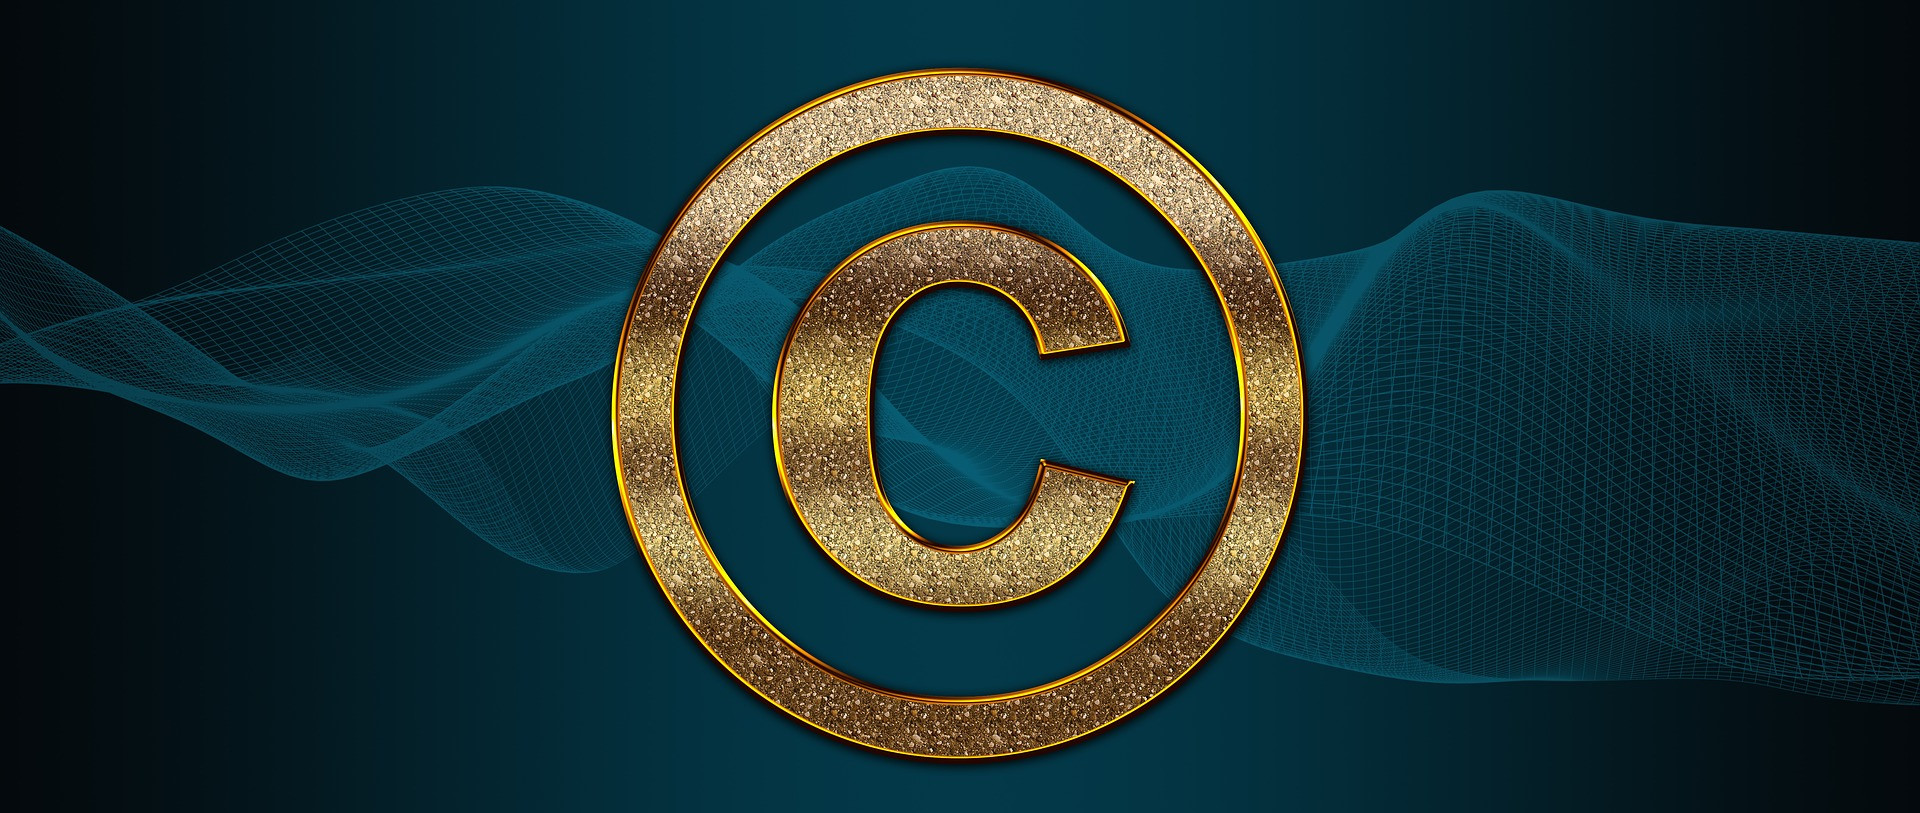 Creative Commons Copyright Featured